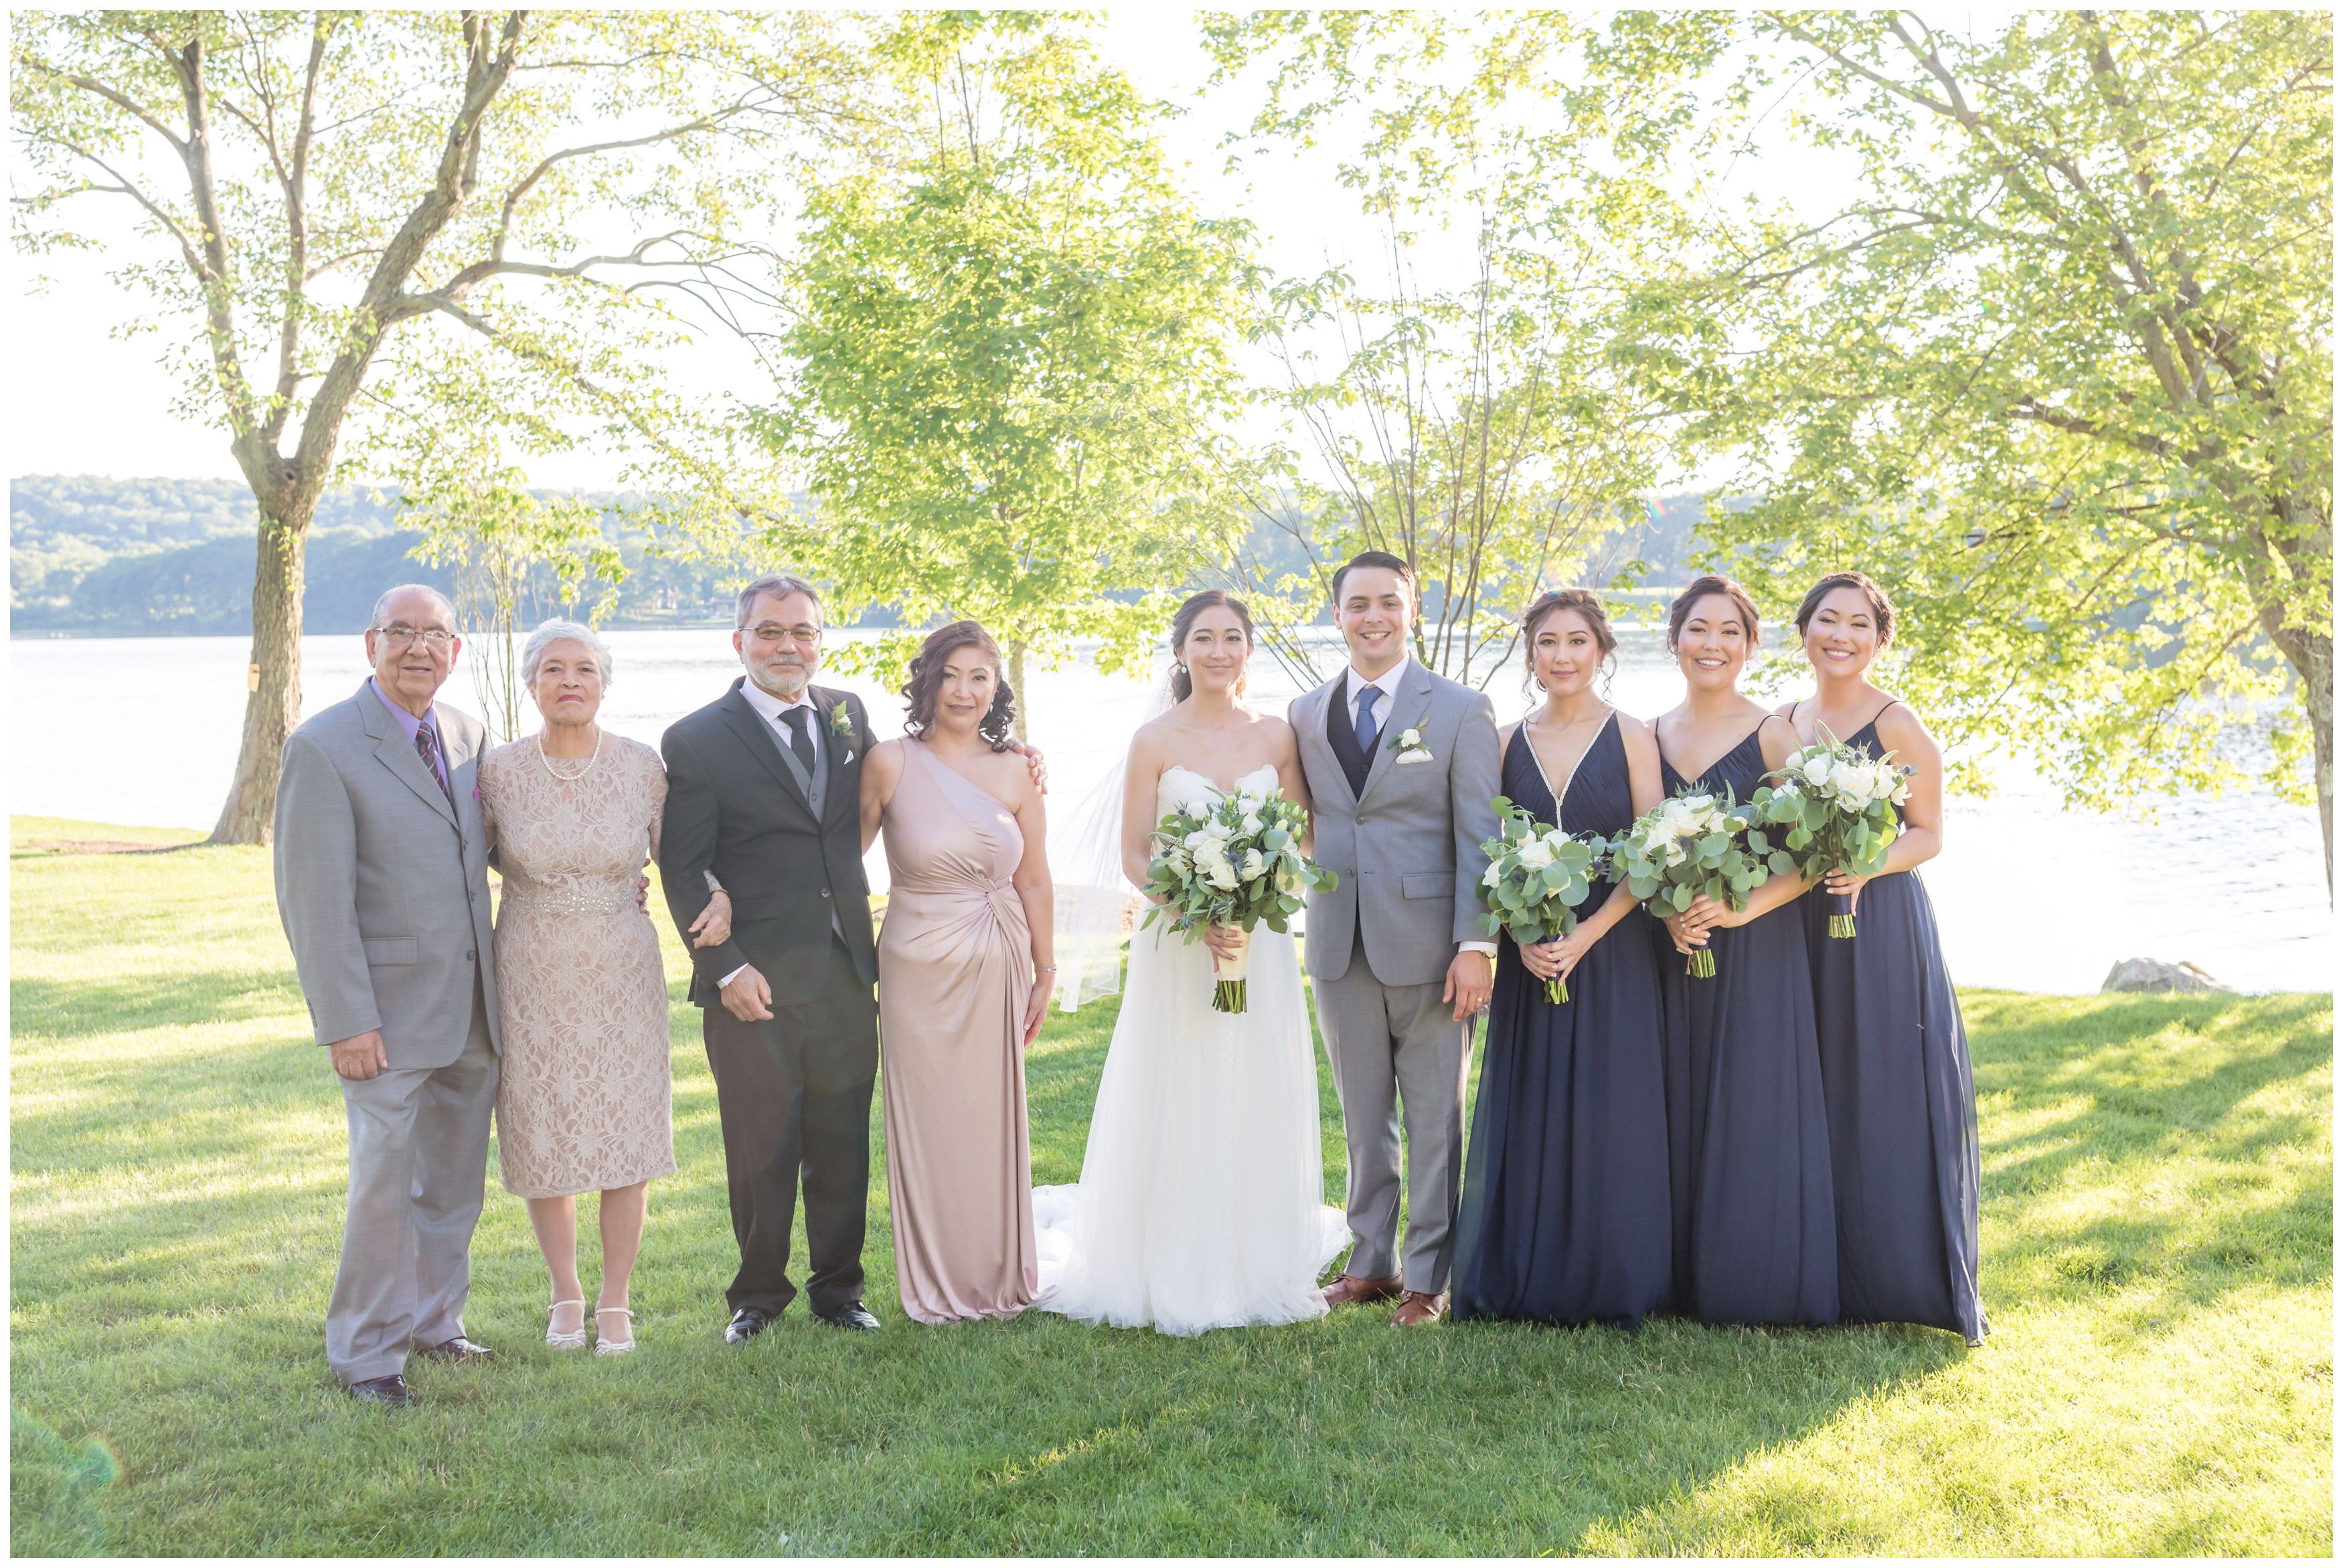 Bride and groom and bride's family at outdoor lakeside wedding